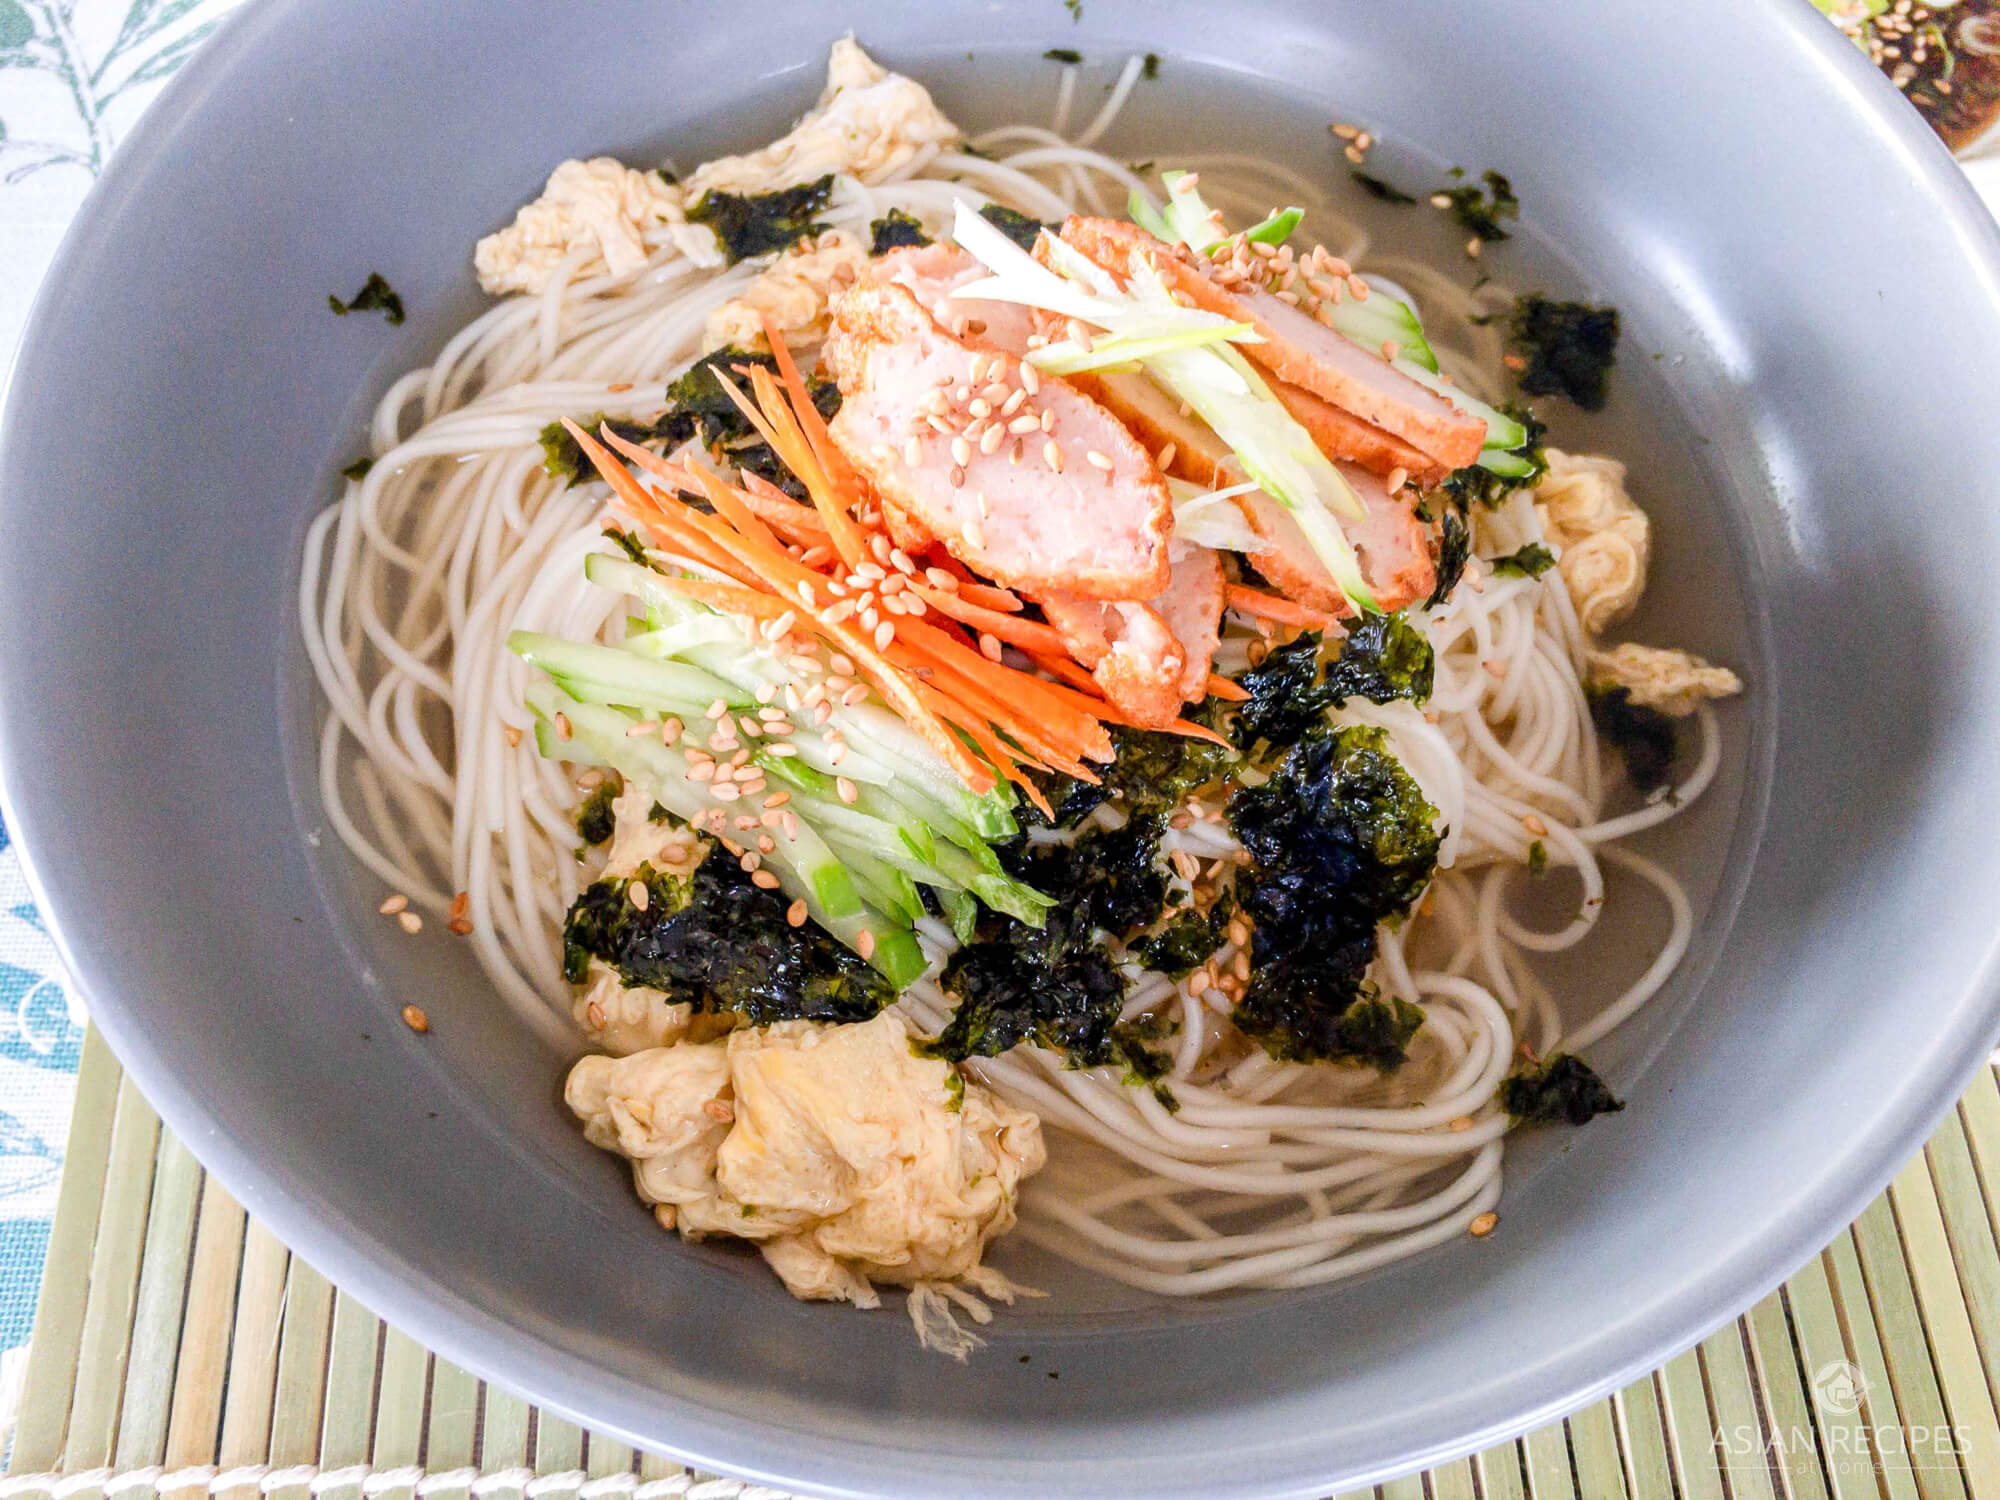 The base of this Korean warm noodle soup recipe is the delicious homemade umami filled clear soup stock. Top this bowl of noodles with vegetables, crumbled roasted nori sheets (gim), and sliced fish cake and you have yourself a fabulous healthy, savory and light meal.